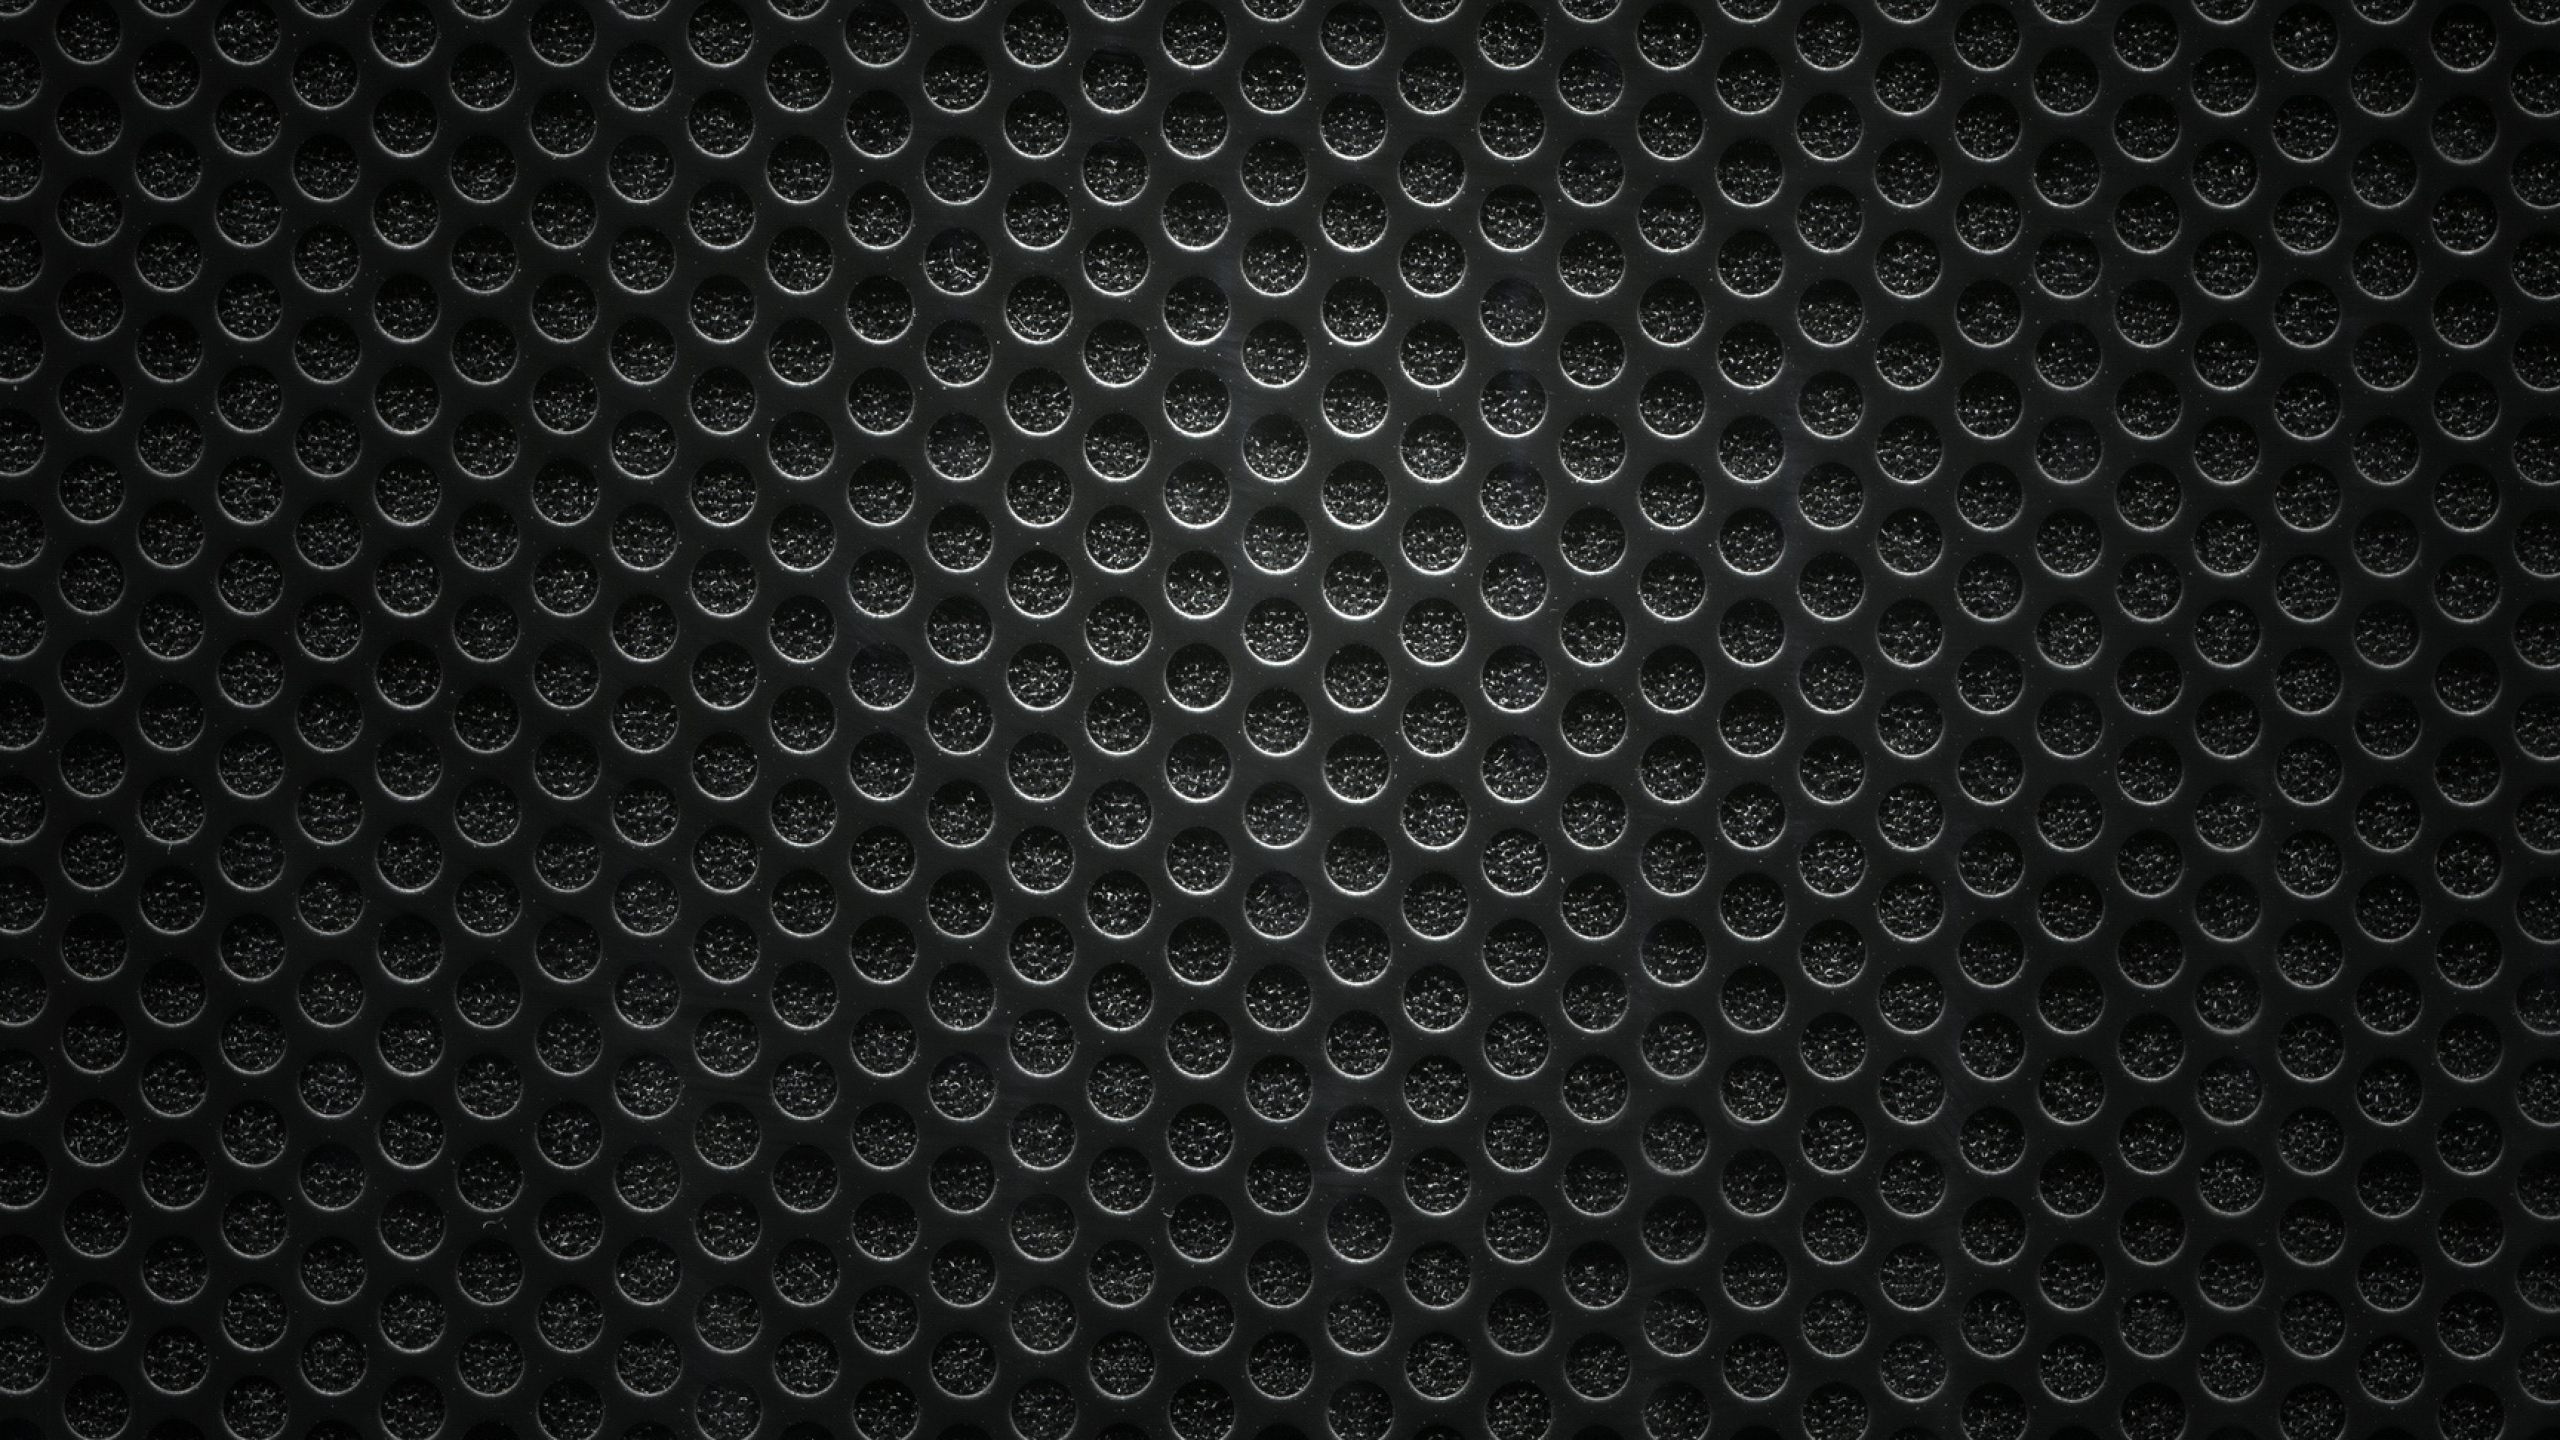 Black and White Polka Dot Textile. Wallpaper in 2560x1440 Resolution